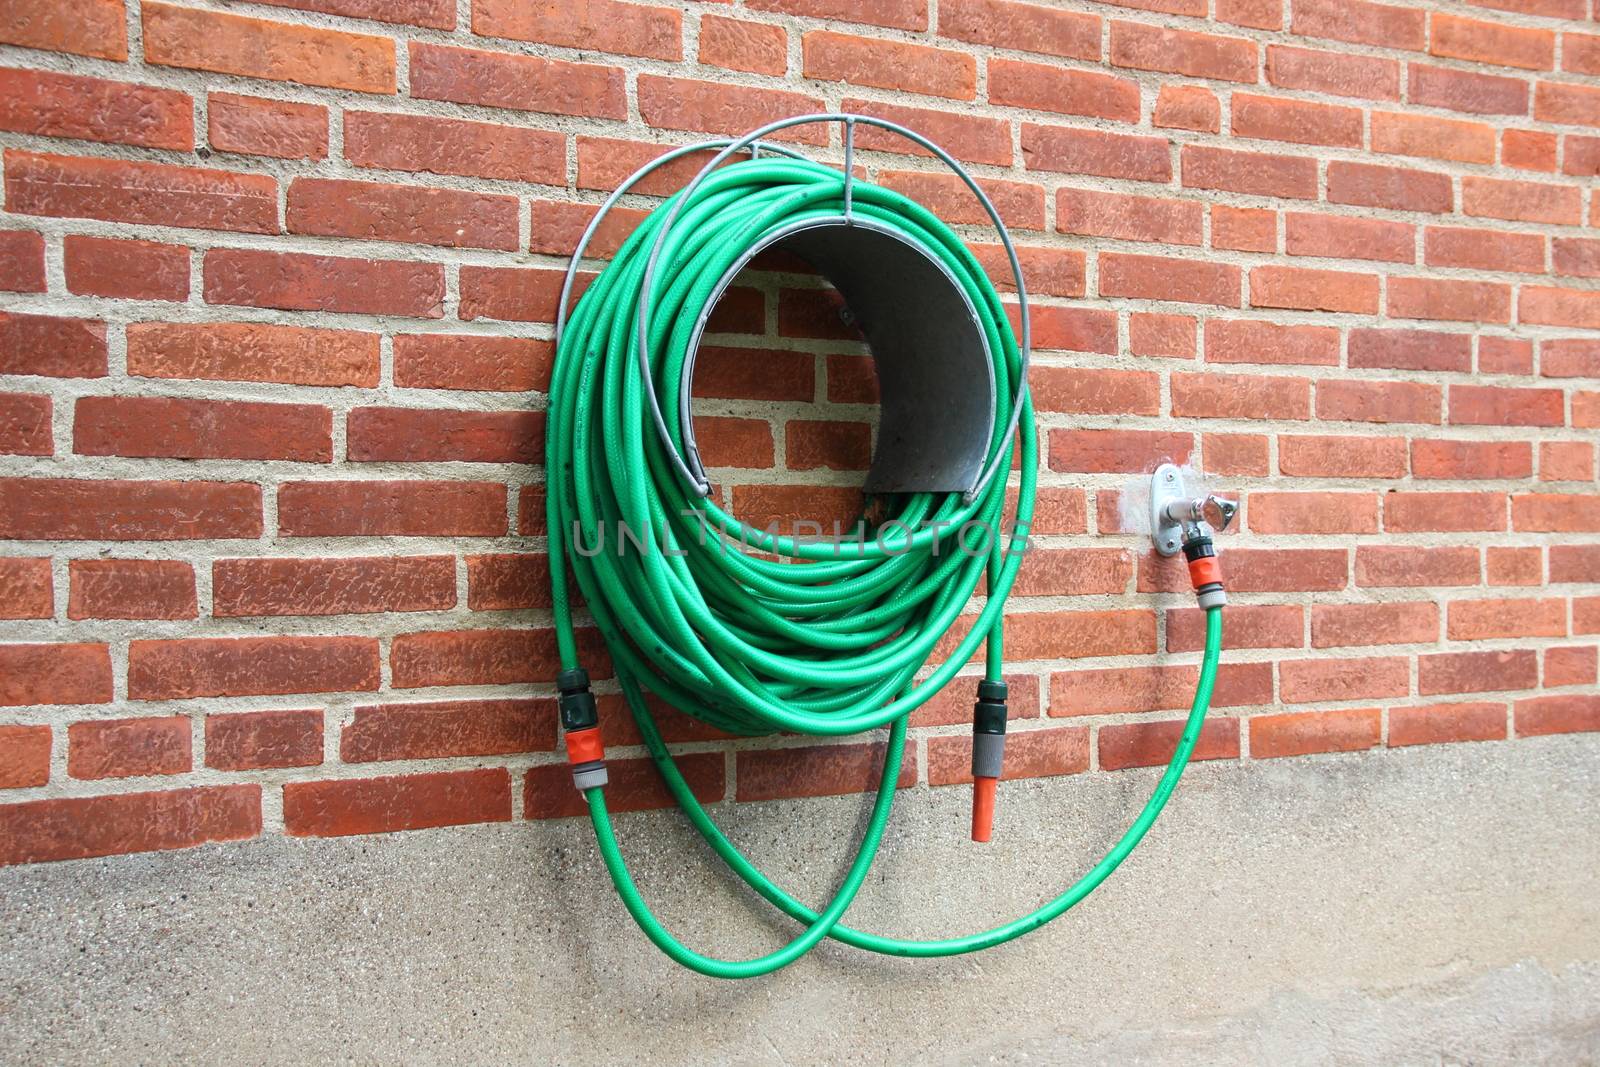 Green water hose hanging red brick wall